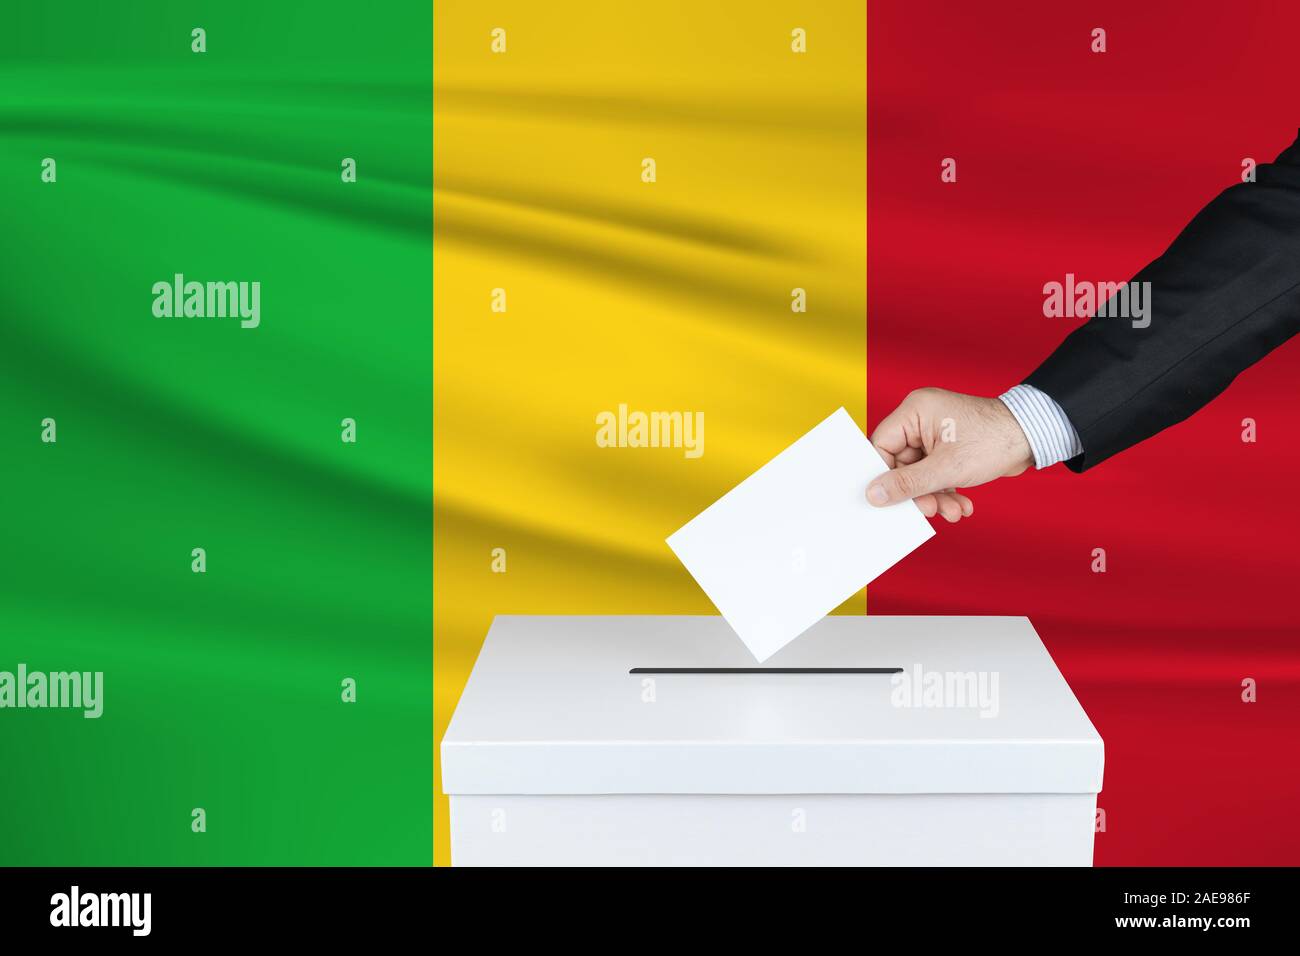 Election in Mali. The hand of man putting his vote in the ballot box. Waved Mali flag on background. Stock Photo